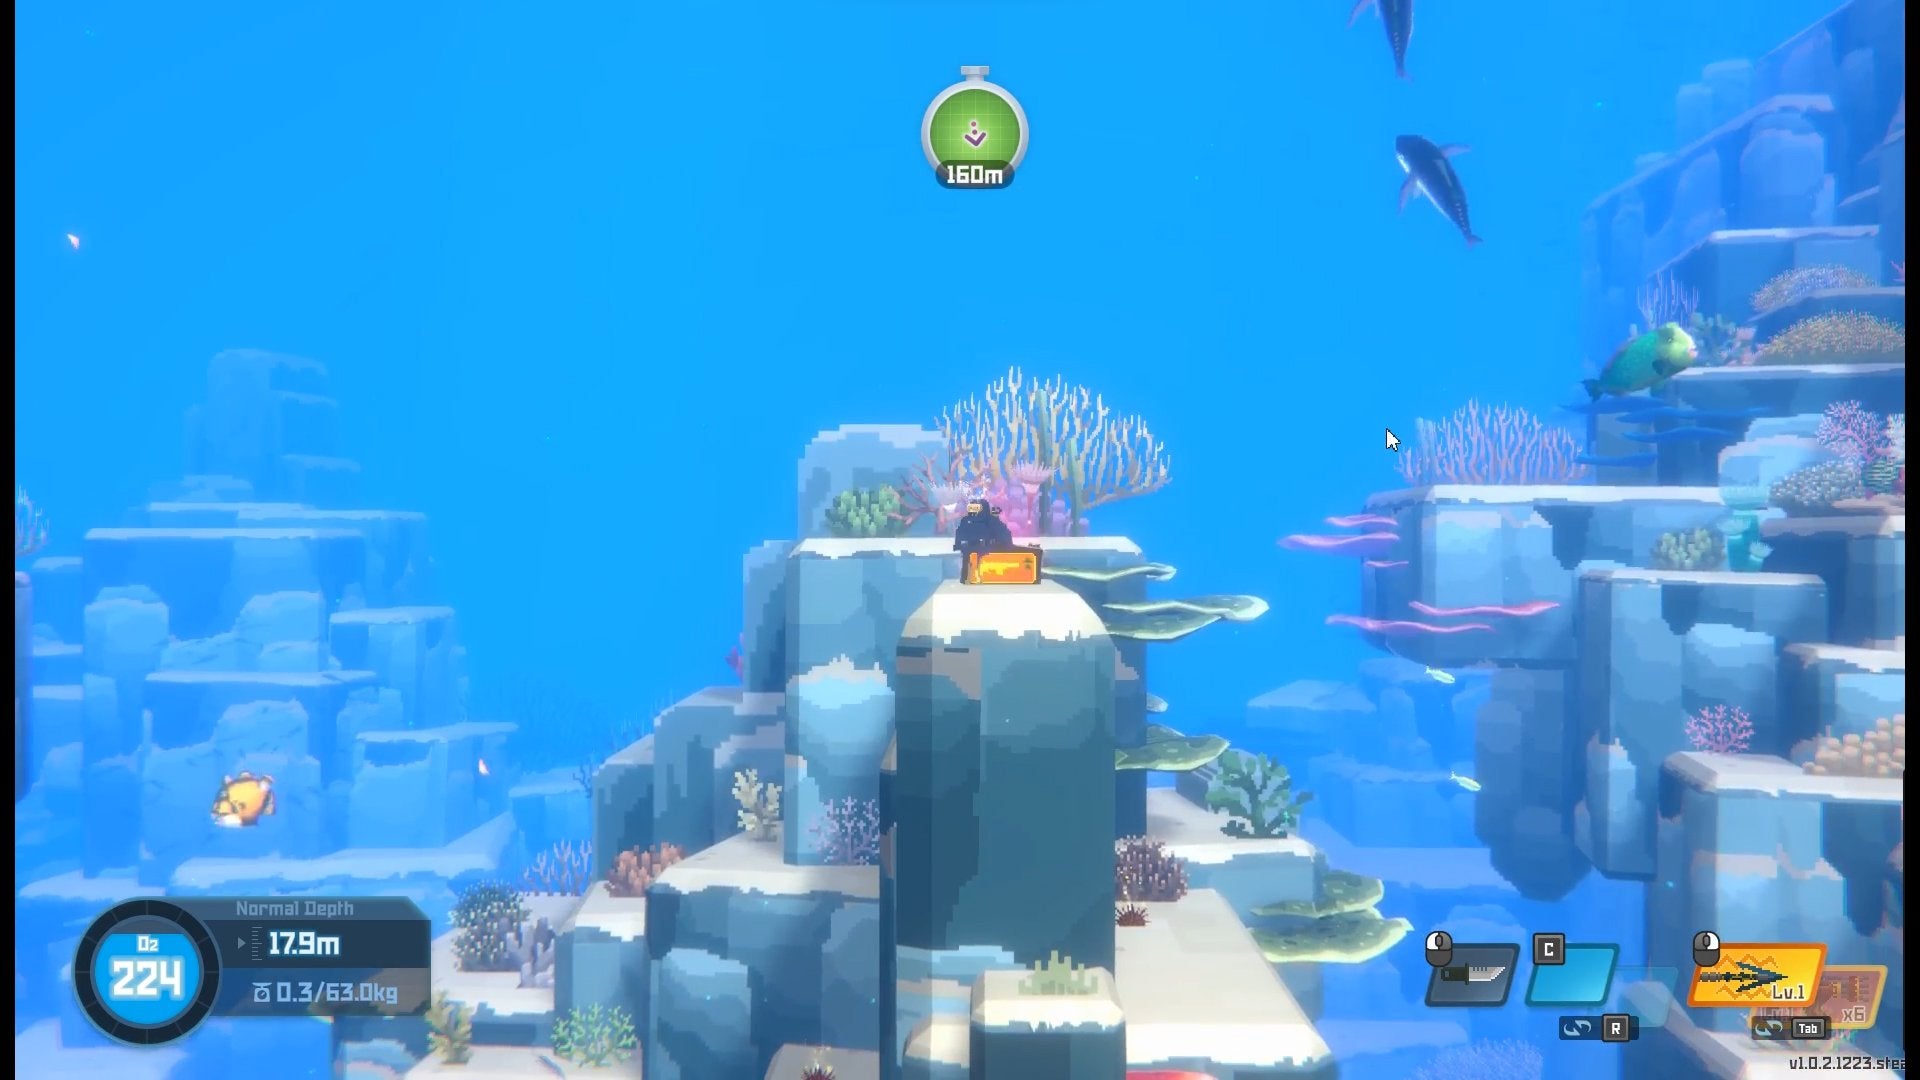 The player swimming next to an orange box with a gun symbol on it while underwater in Dave the Diver.